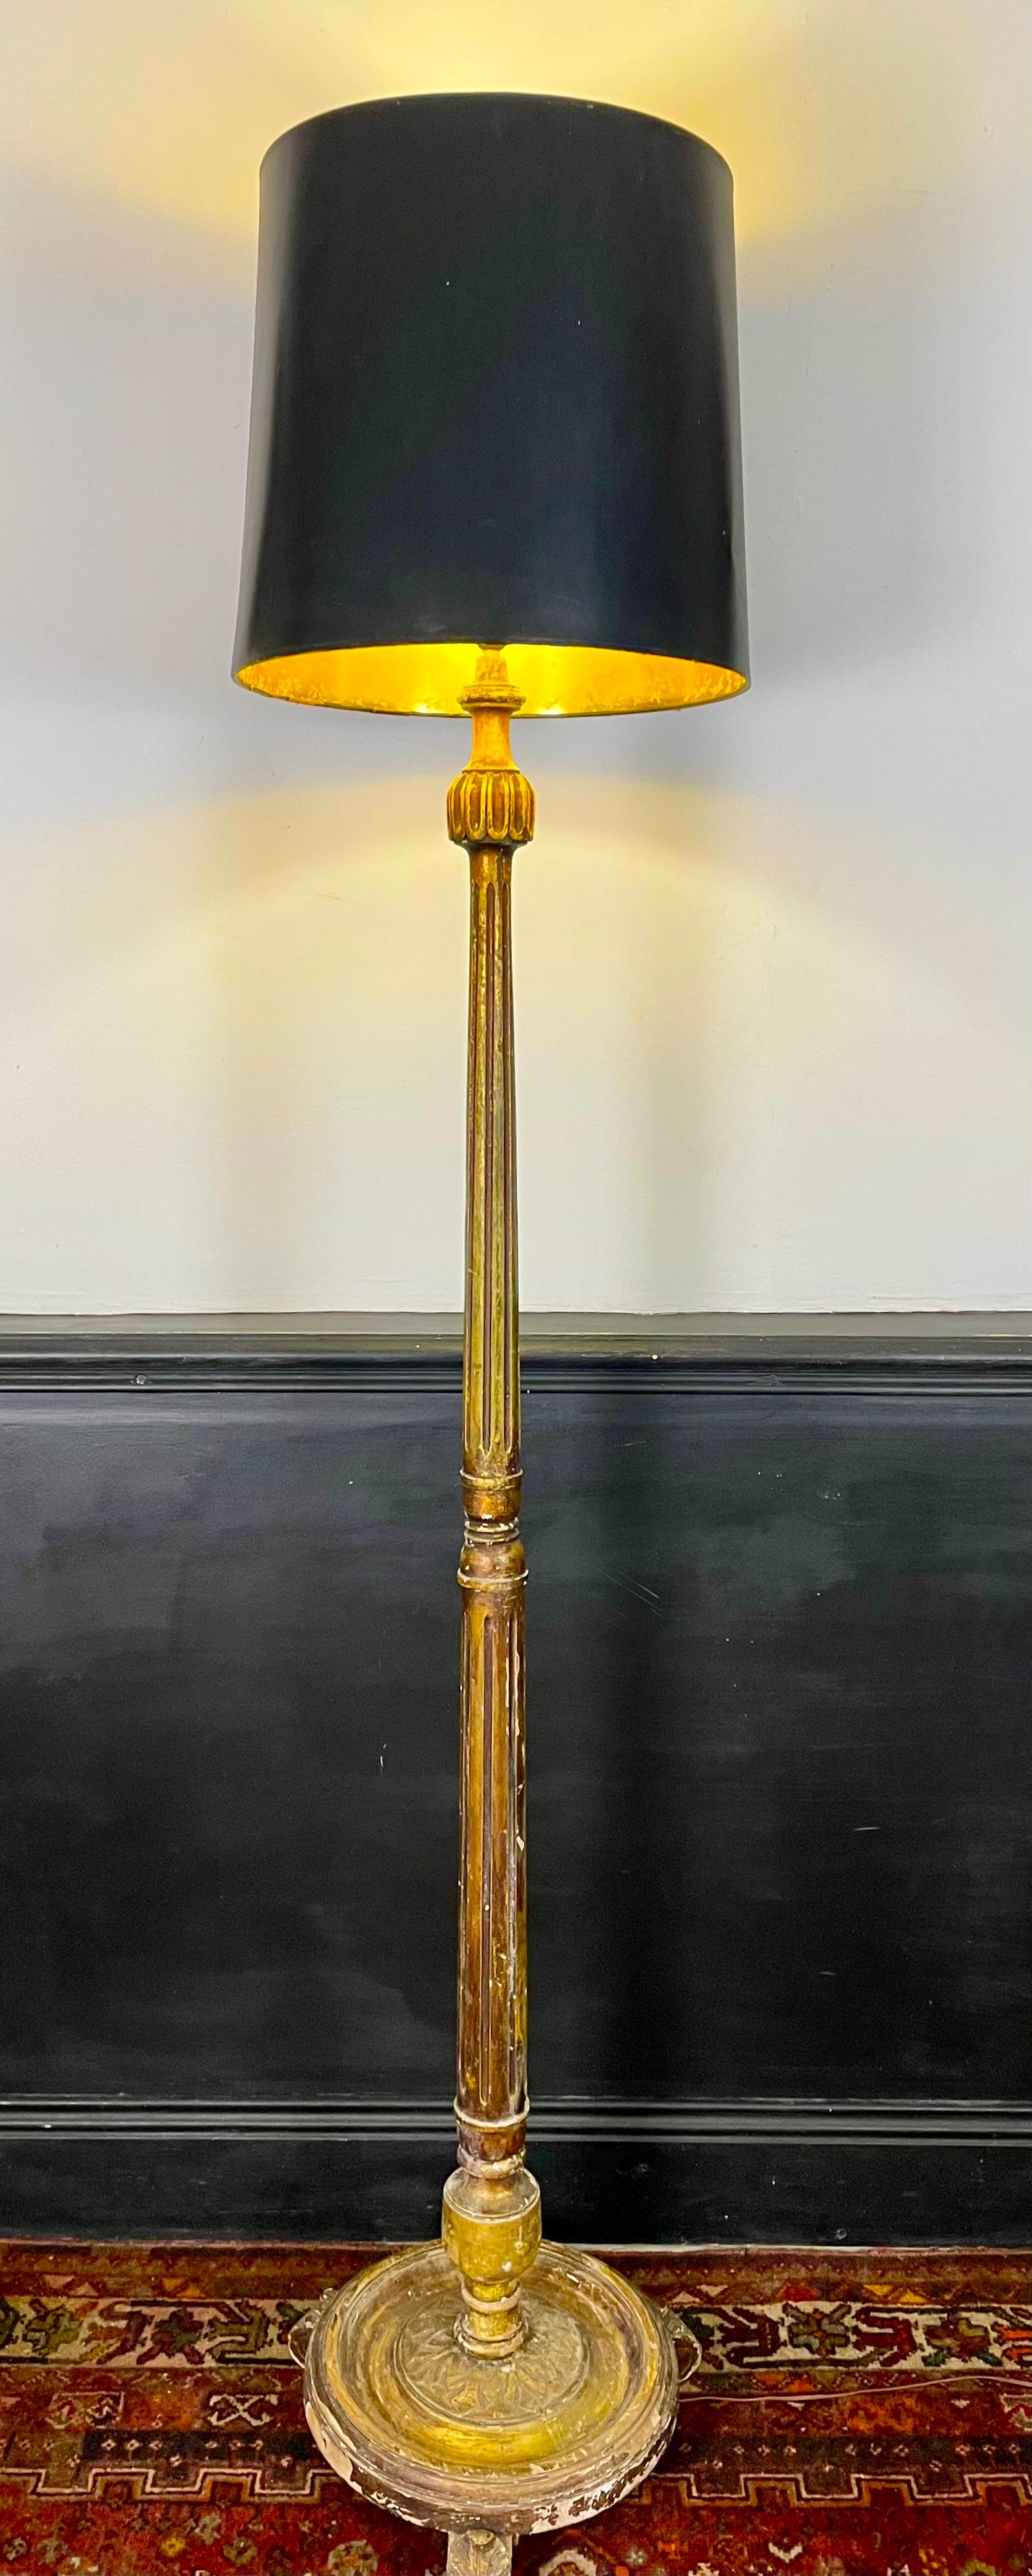 Floor lamp.
Lamp base in fluted and gilded wood, Louis XVI style.
Early XXth.
Very decorative.
French work
Provenance: Castle in France

The Louis XVI style was born in France and was exported throughout Europe and then the whole world.
The